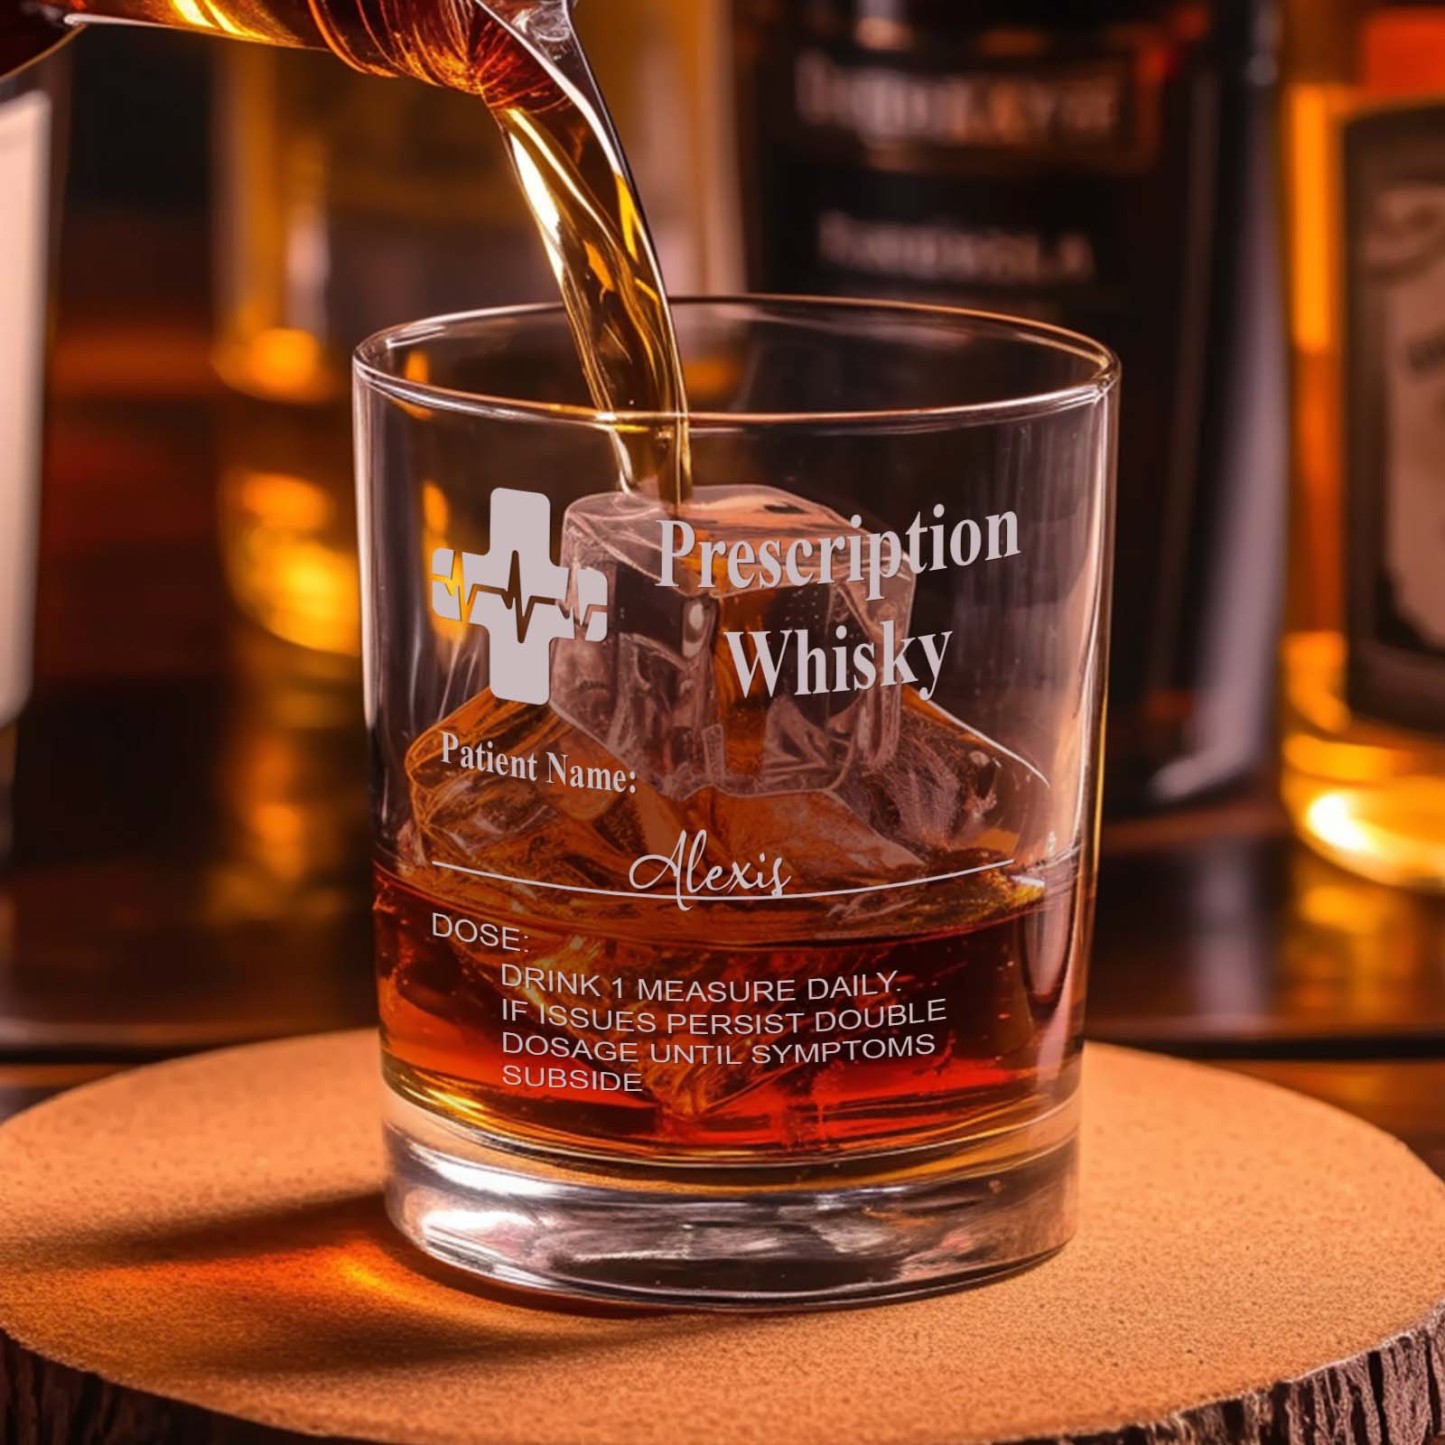 Personalized Funny Prescription Whisky Glasses and Slate Coaster with Laser Engraved Name Father's Day Gift for Grandpa Dad